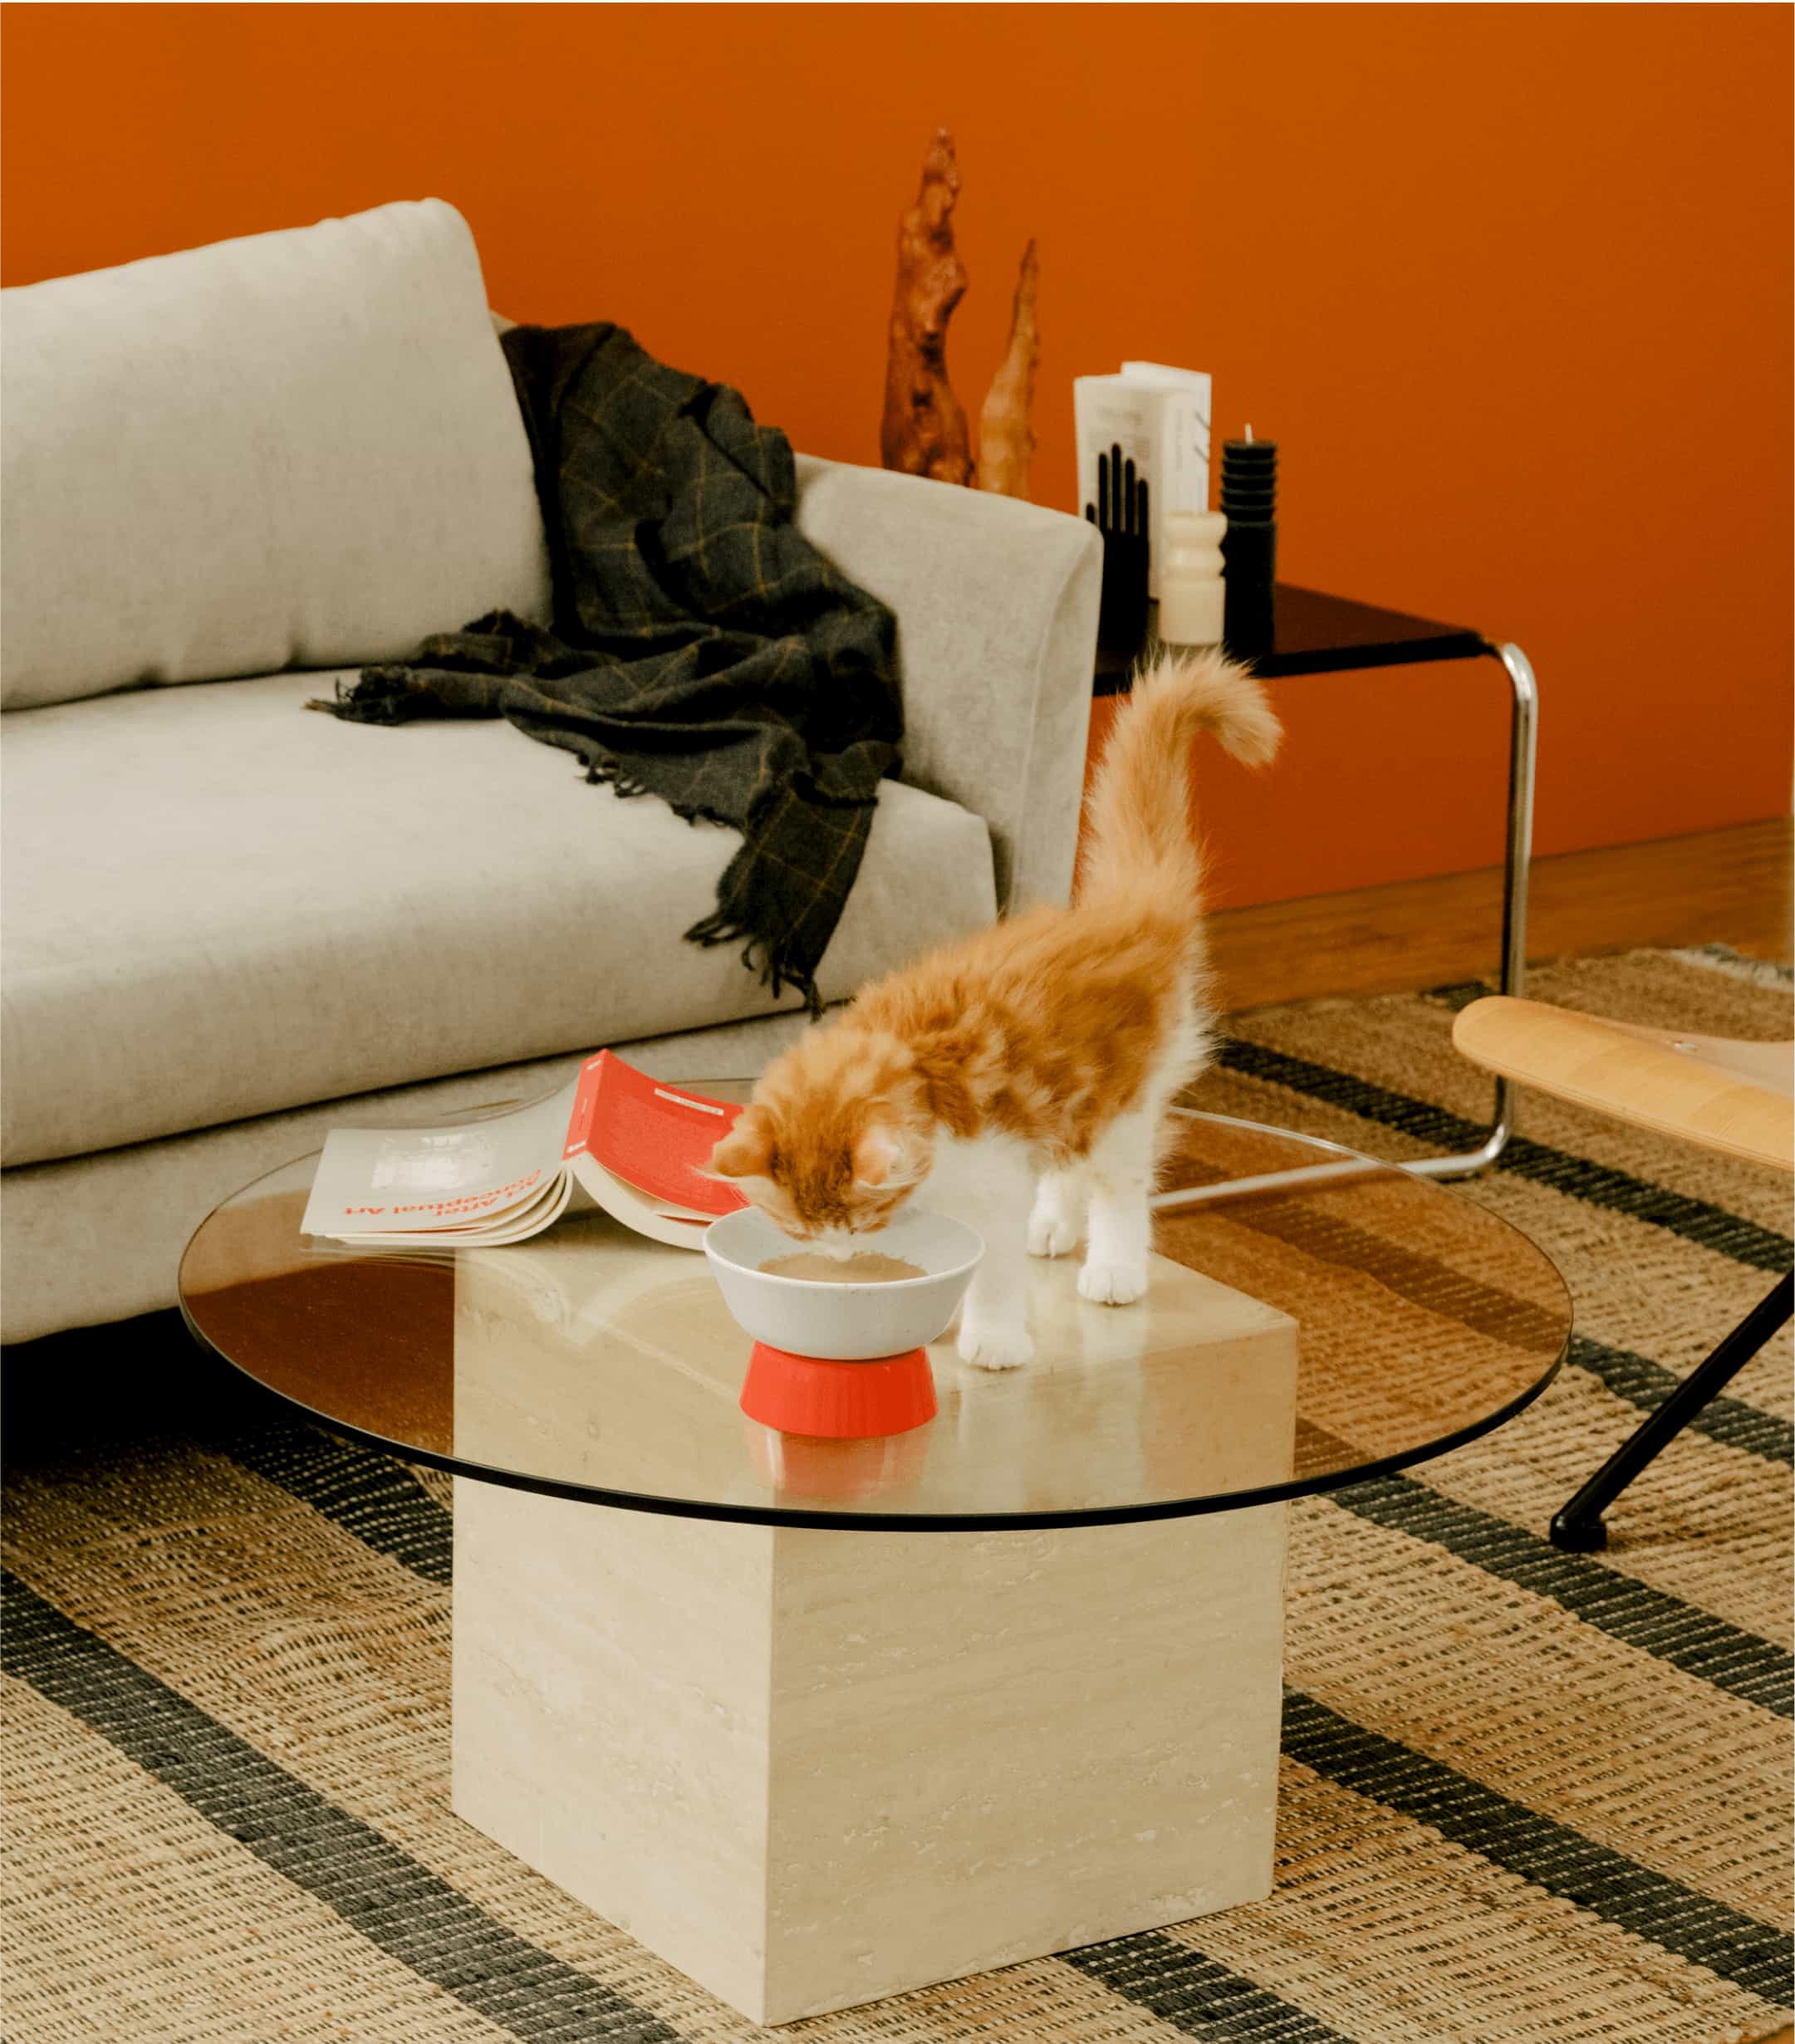 Maine coon kitten licking Cat Person Goodness Blends healthy cat treats out of a Cat Person Mesa Bowl on a glass coffee table